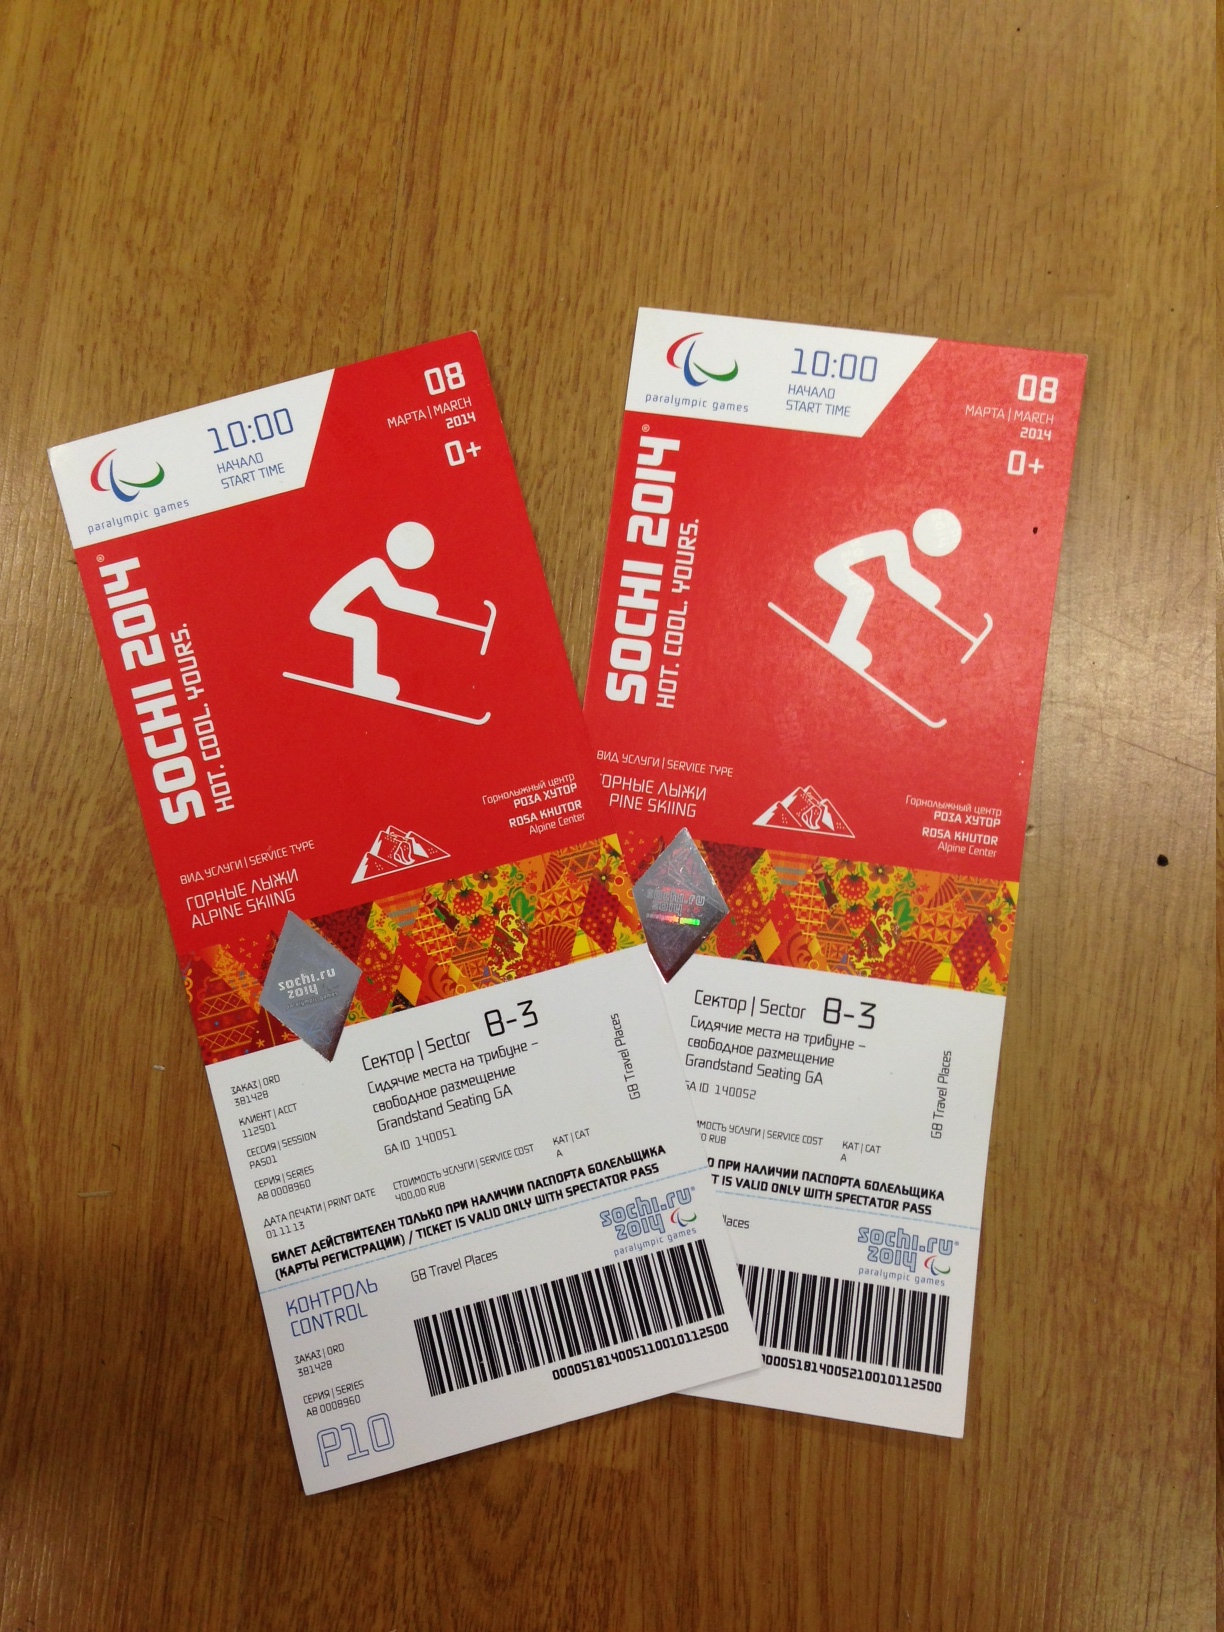 A photo of two tickets for the Paralympics